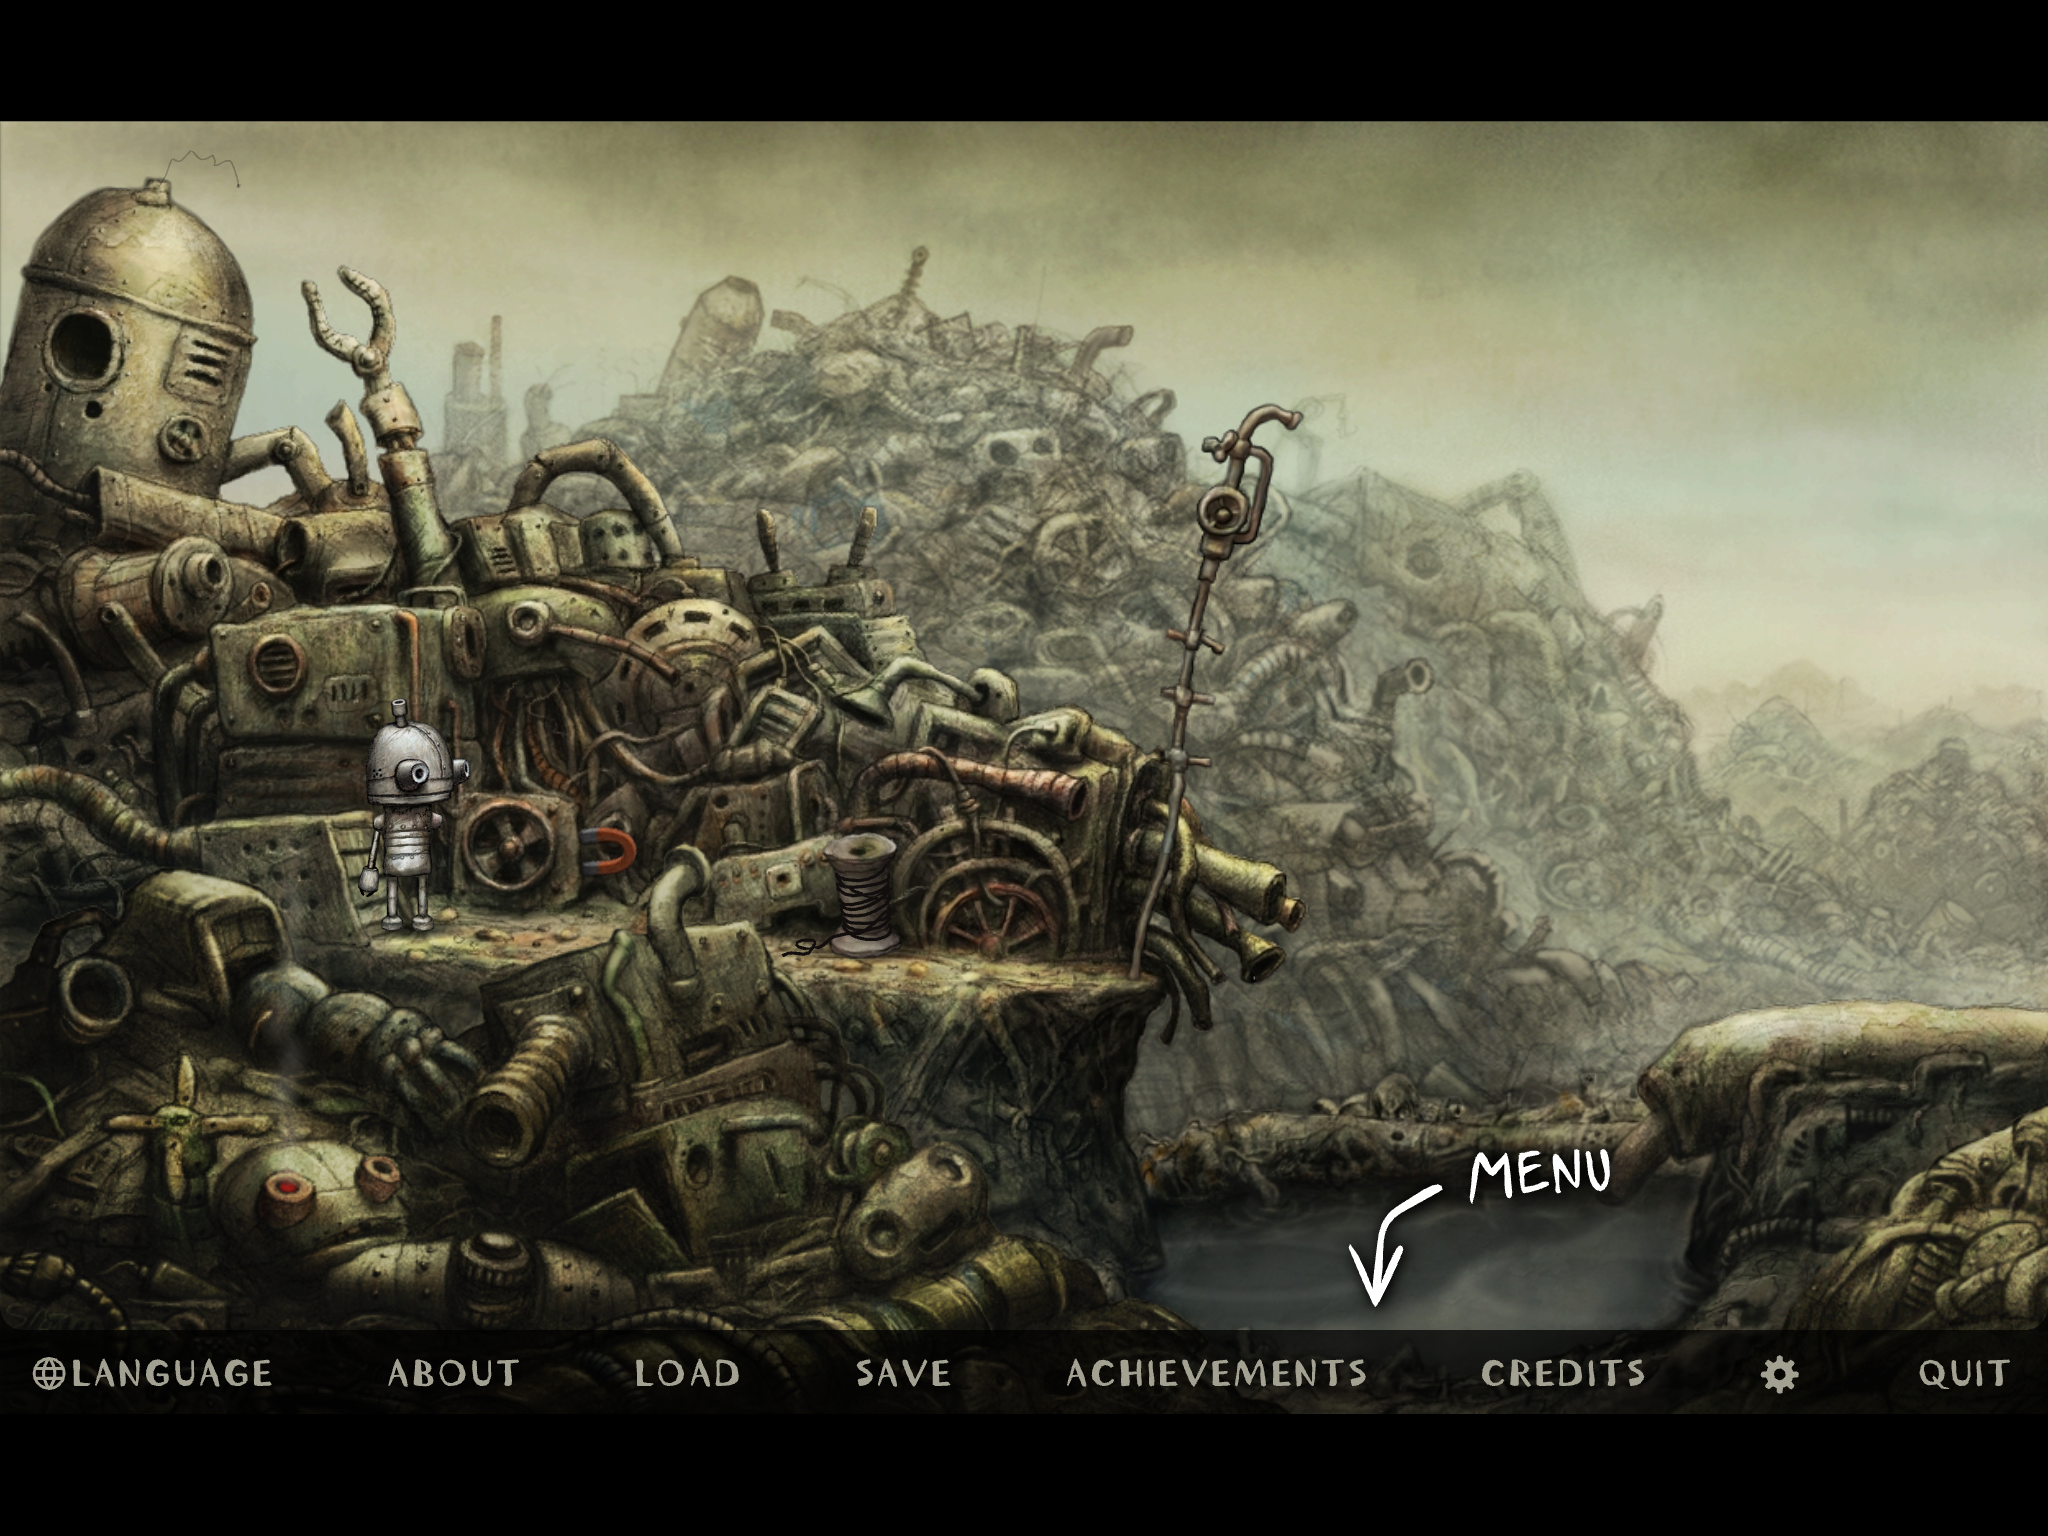 The same scene from Machinarium, with an arrow pointing to where the user needs to tap to bring up the game menu at the bottom of the screen